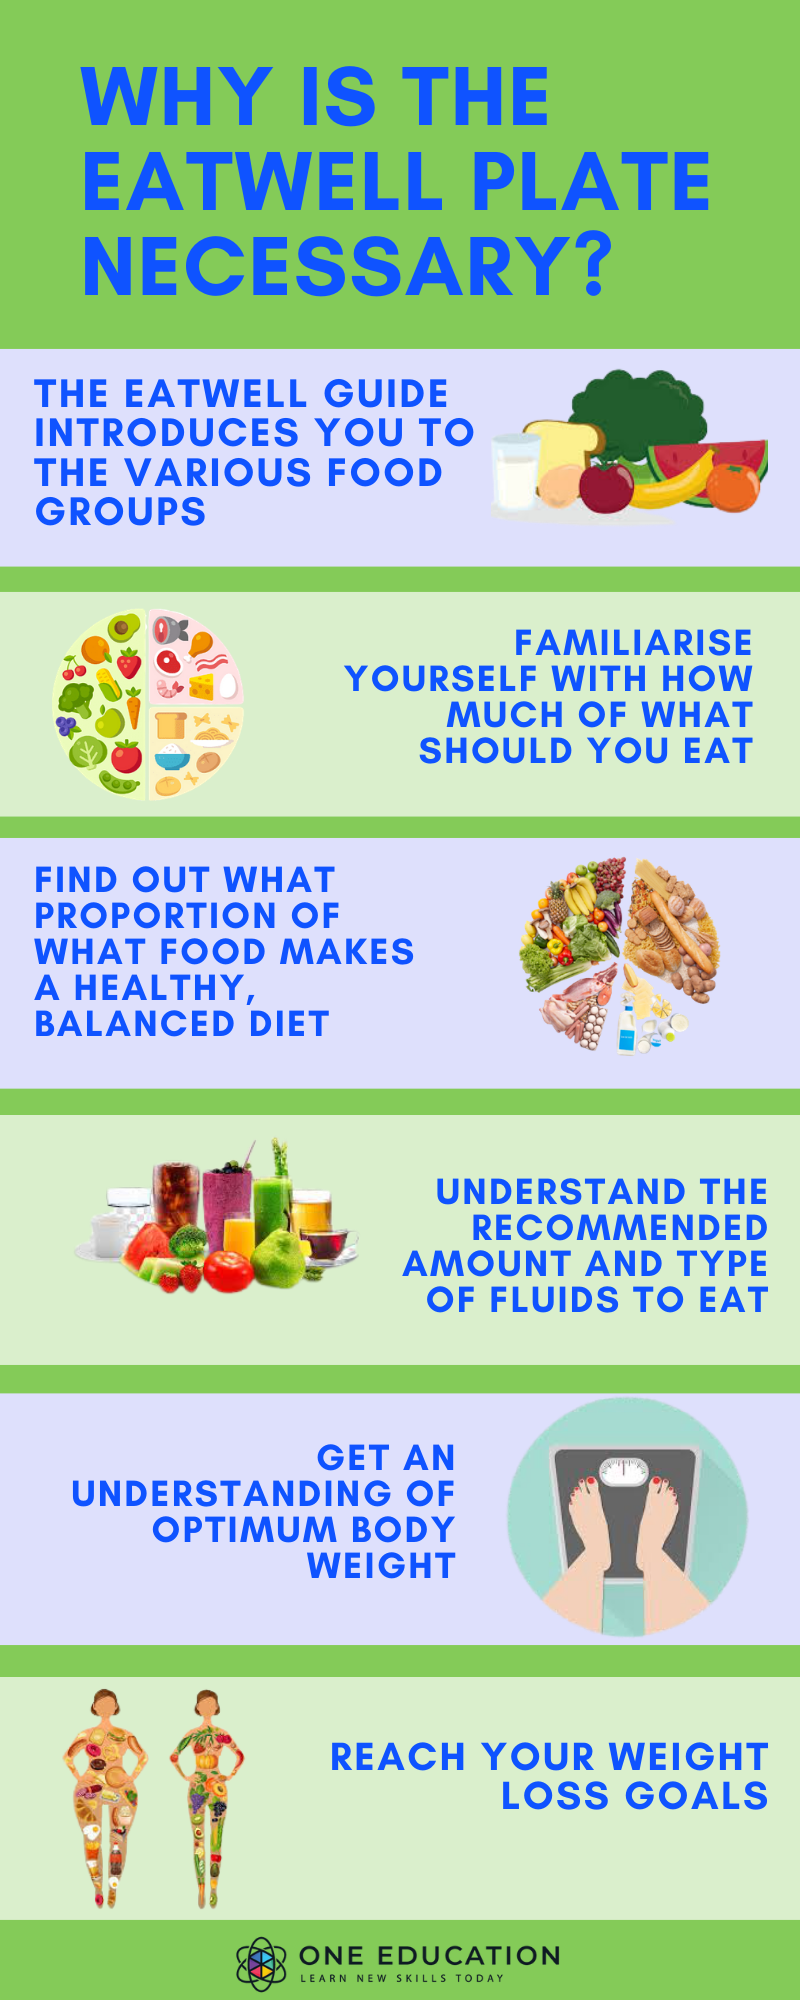 why eatwell plate necessary